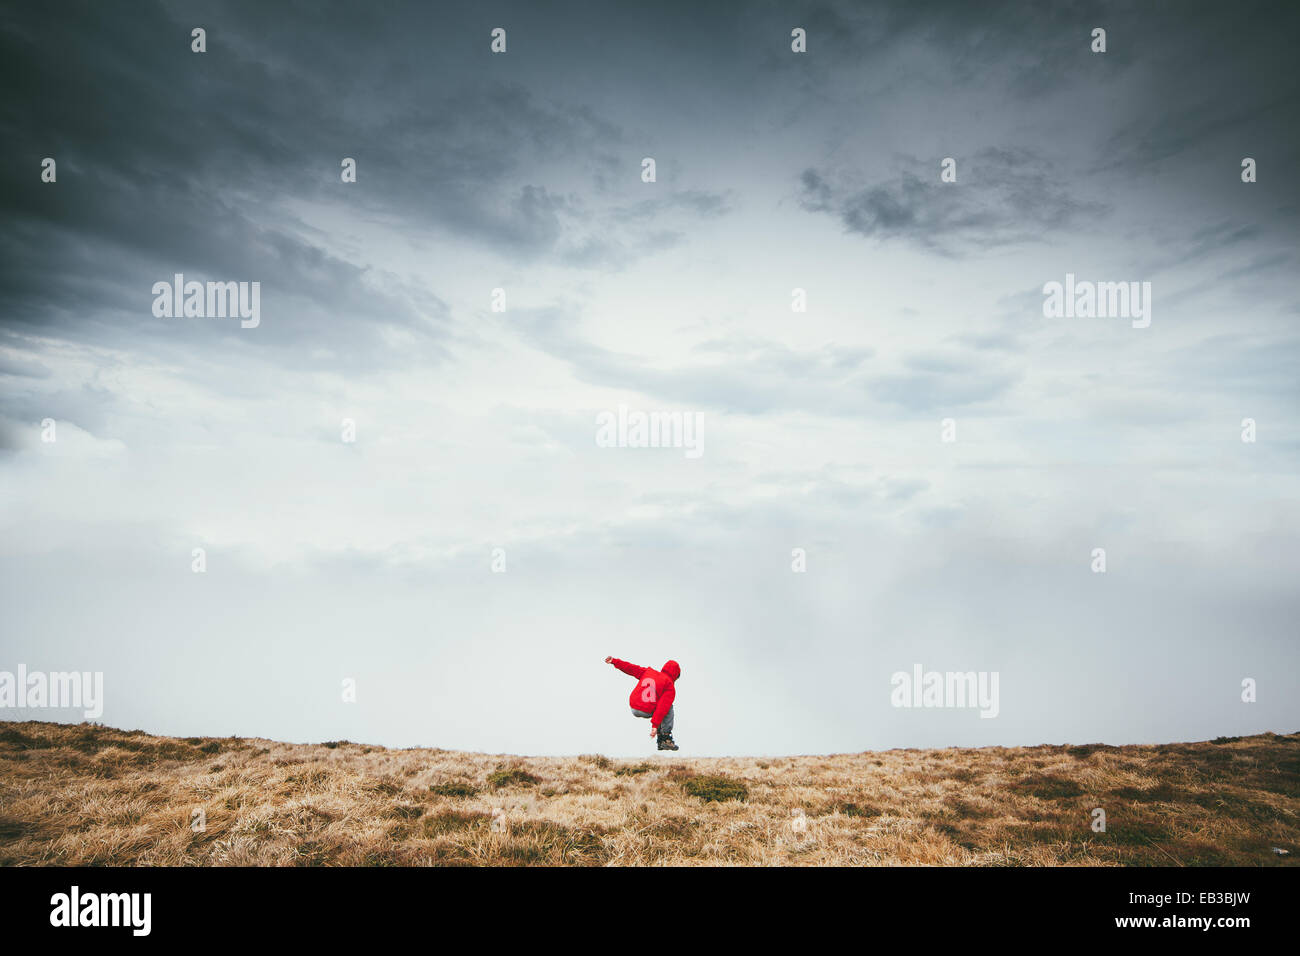 Man jumping in rural landscape Stock Photo